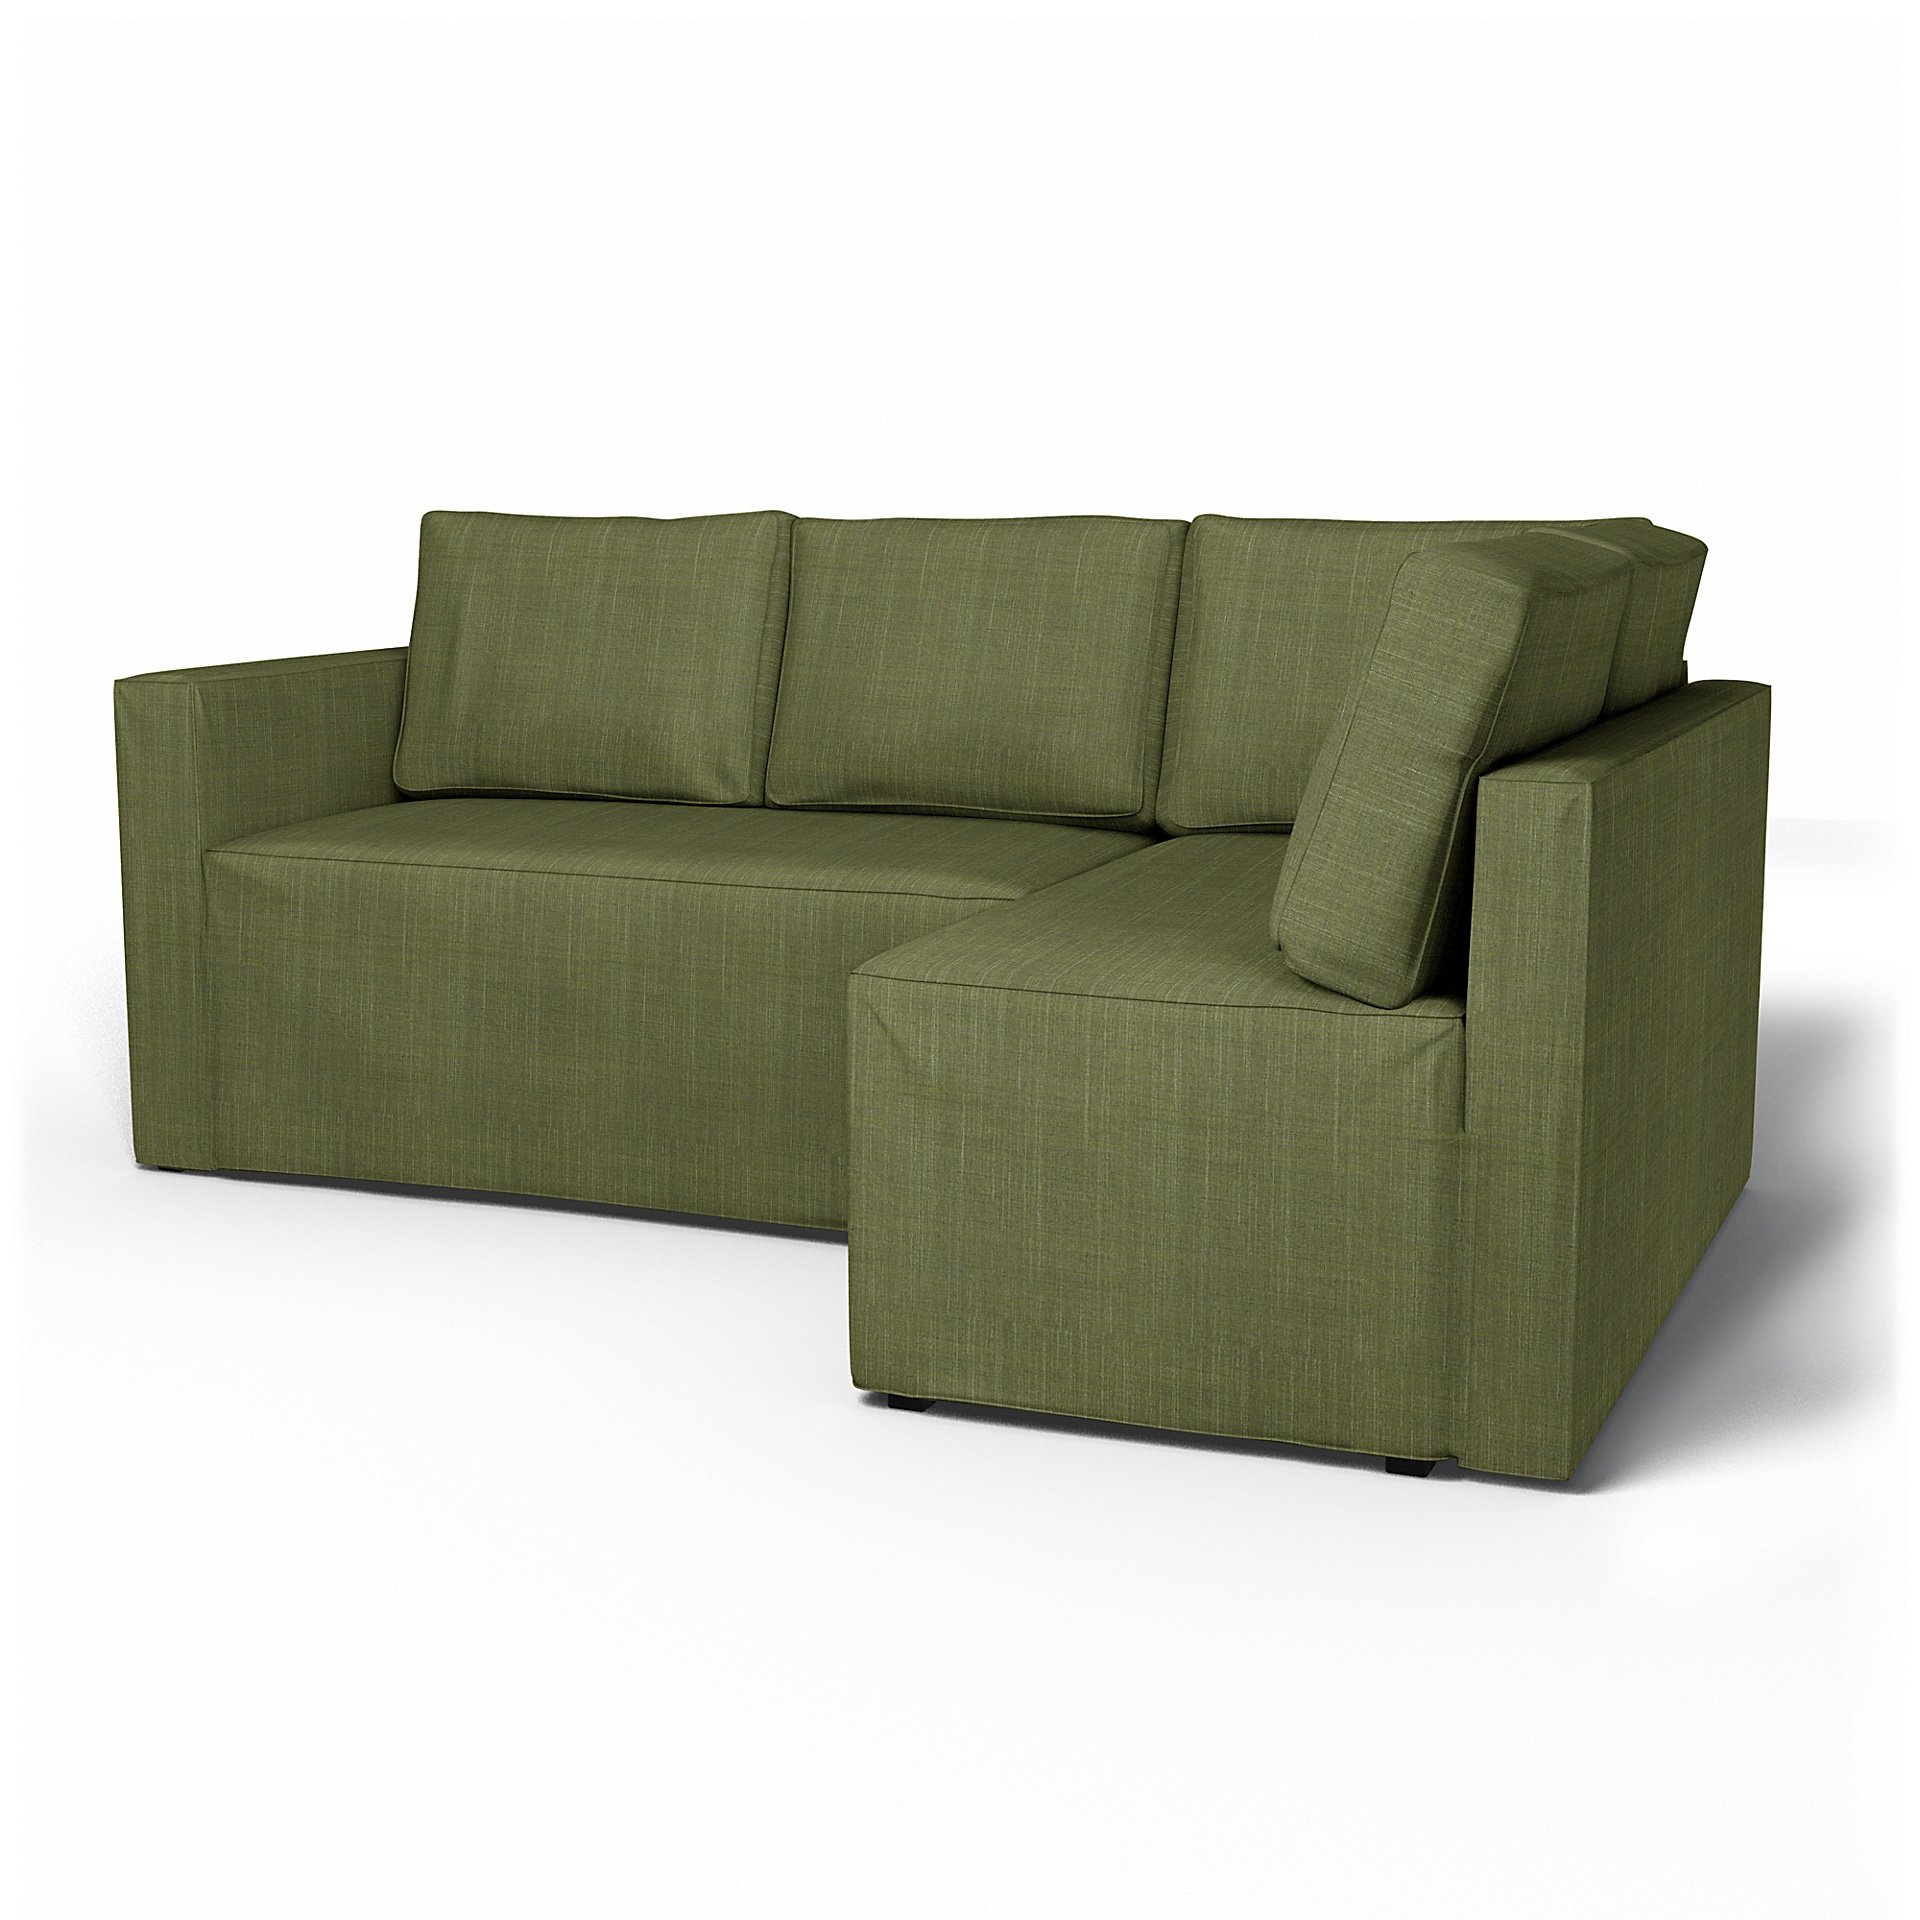 IKEA - Fagelbo Sofa Bed with Right Chaise Cover, Moss Green, Boucle & Texture - Bemz